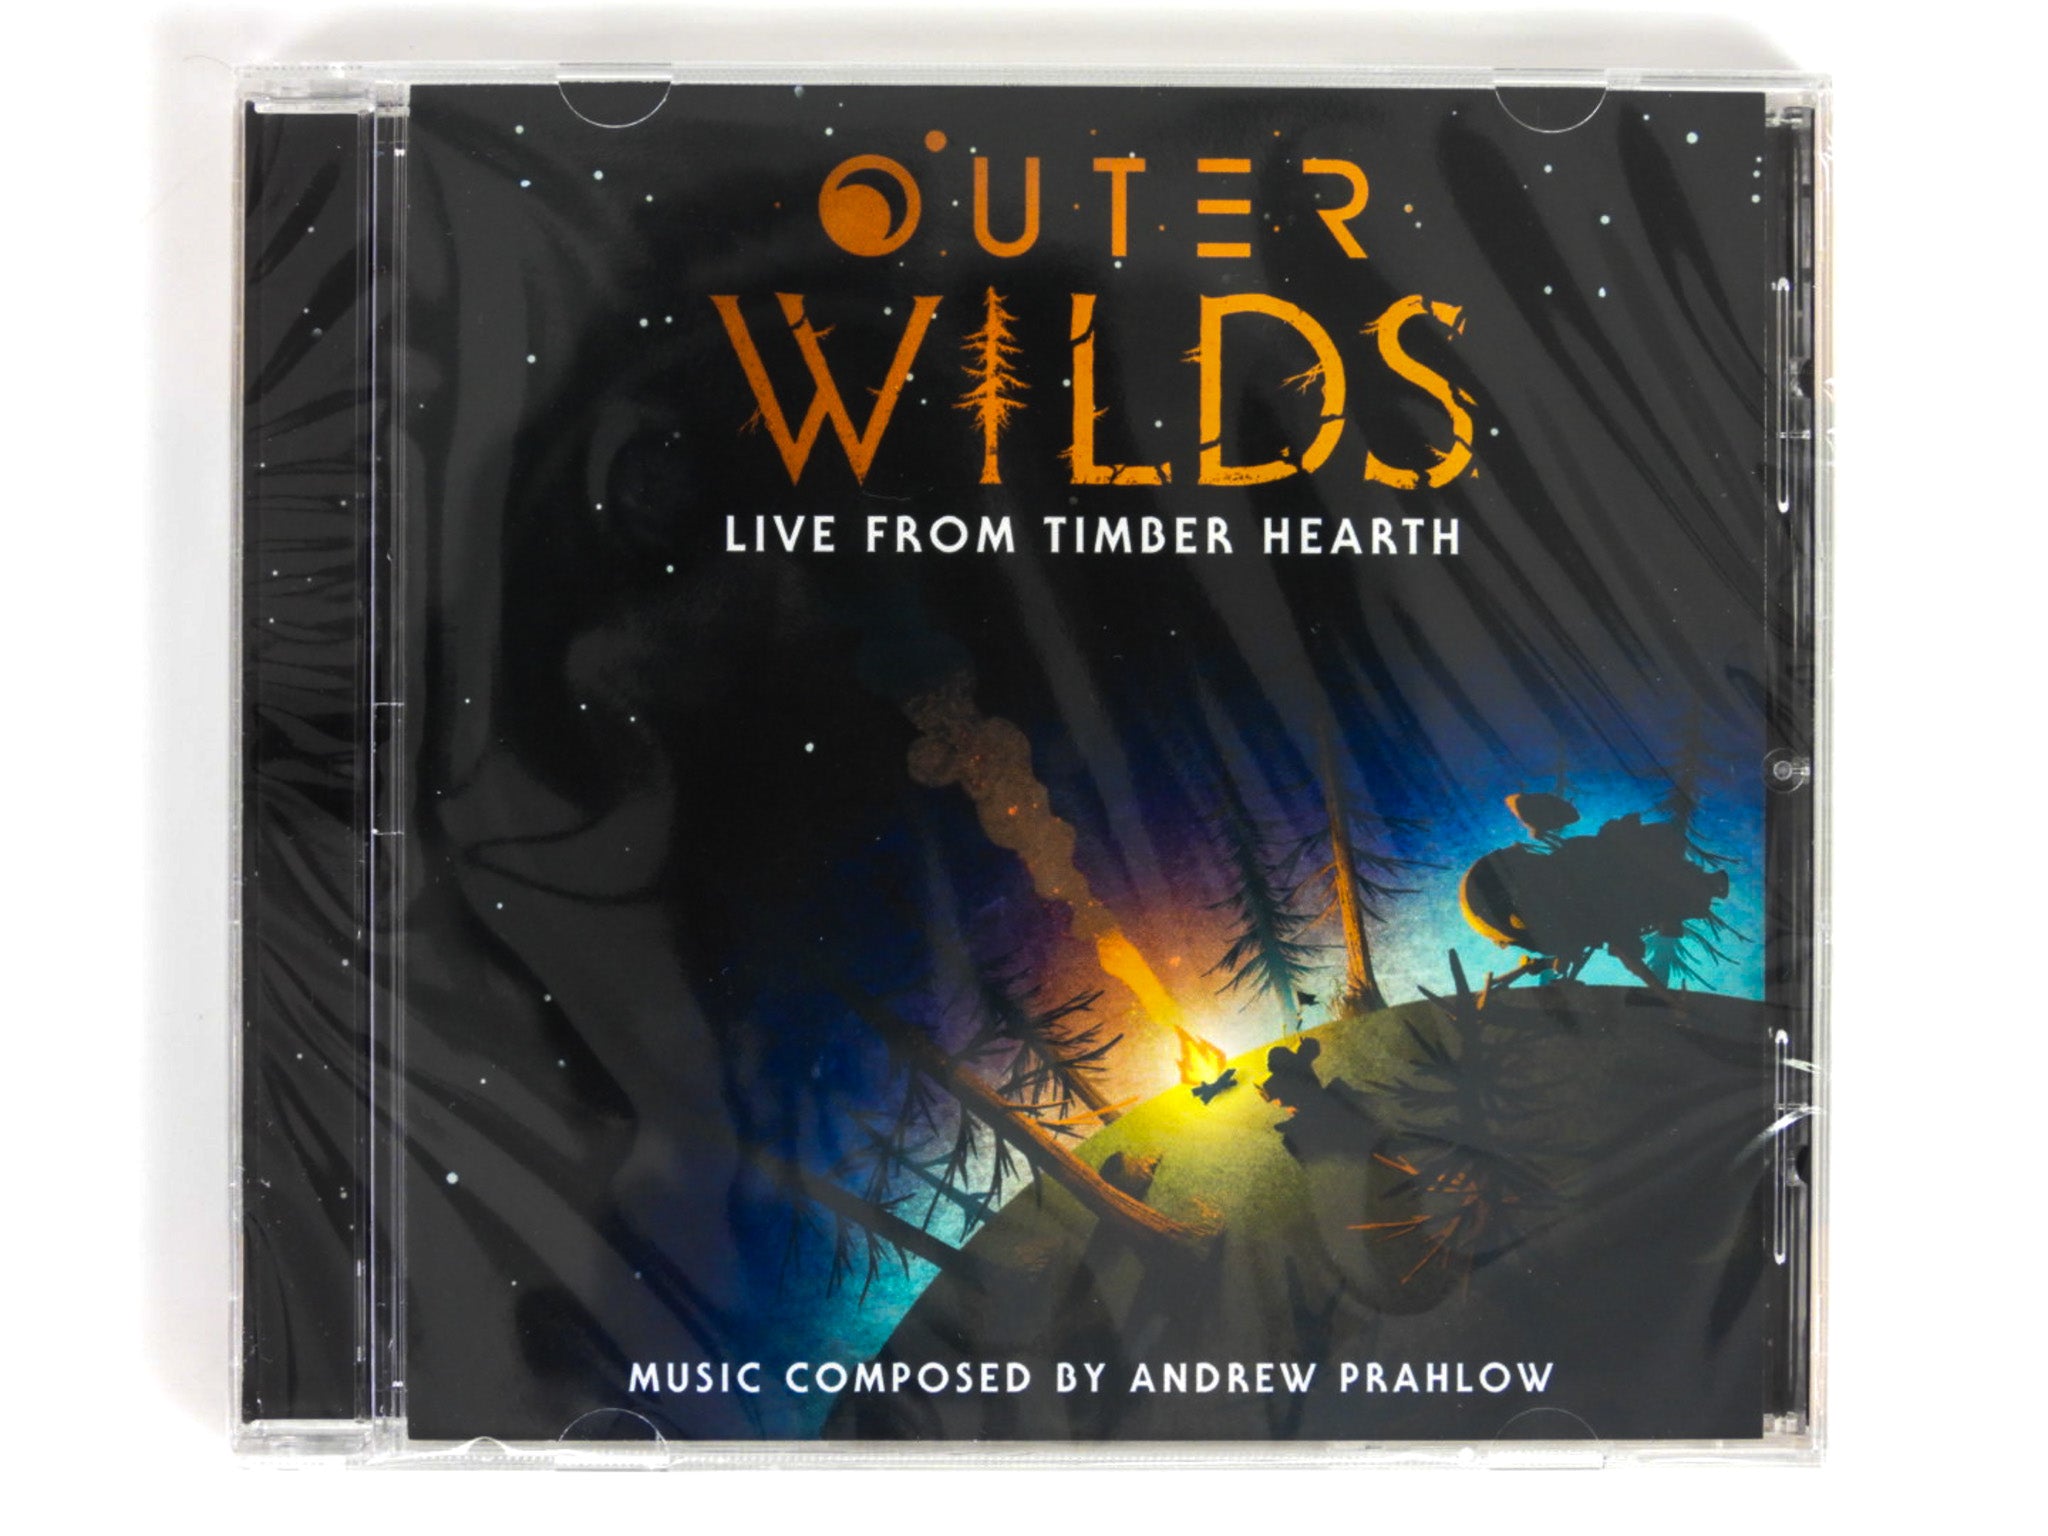 Limited Run Games on X: Get the physical edition of Outer Wilds in a  Standard Edition or in an upgraded Explorers Edition: featuring five Outer  Wilds Ventures post cards, four explorer enamel